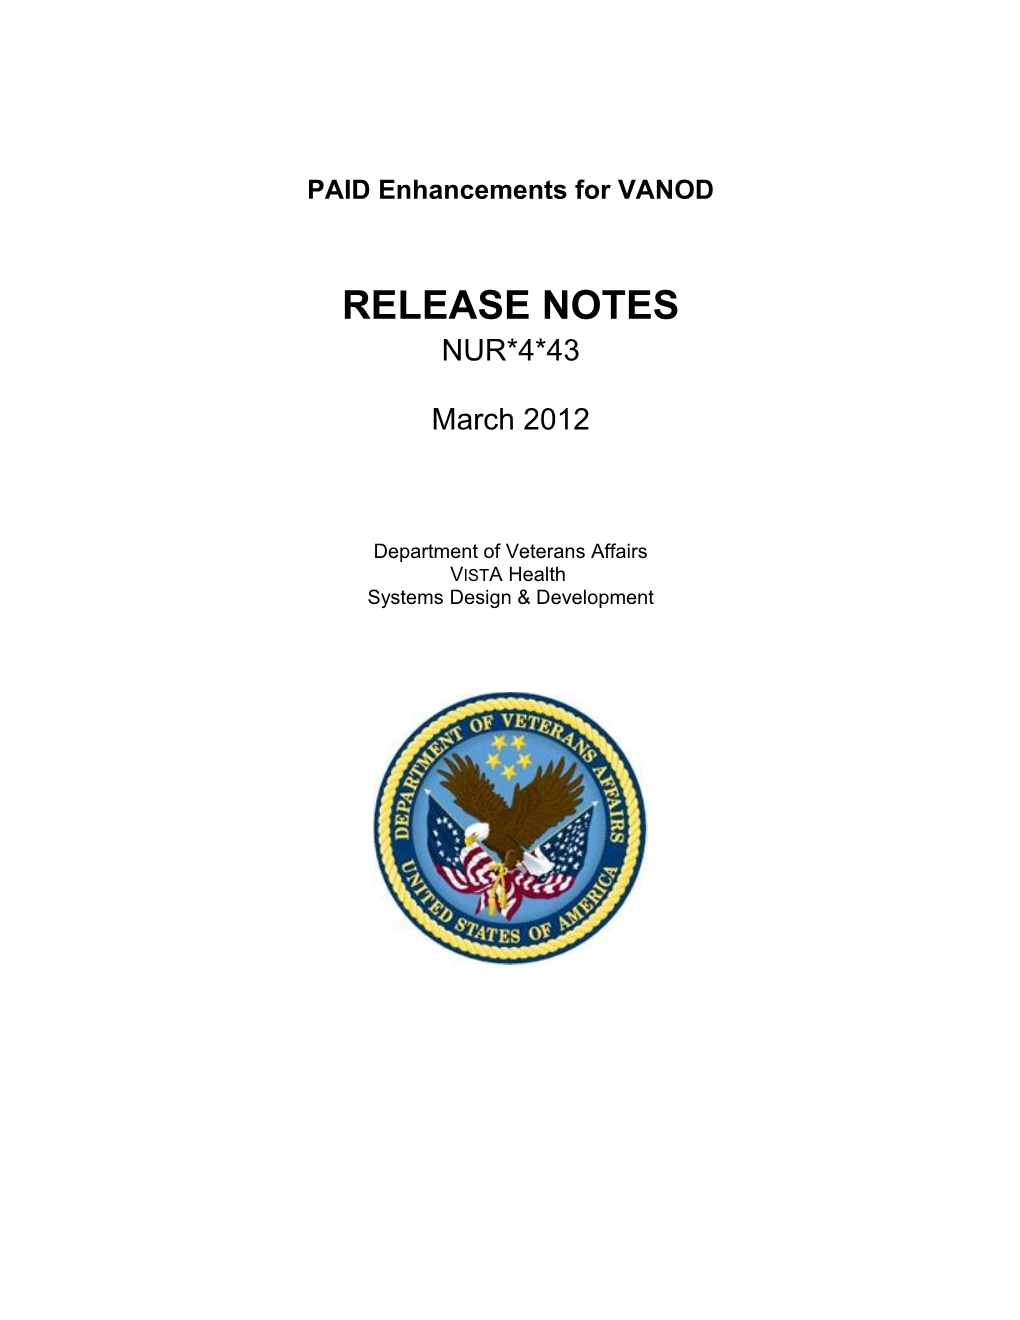 VF Annual EH6 PAID VANOD NUR 4 43 Release Notes